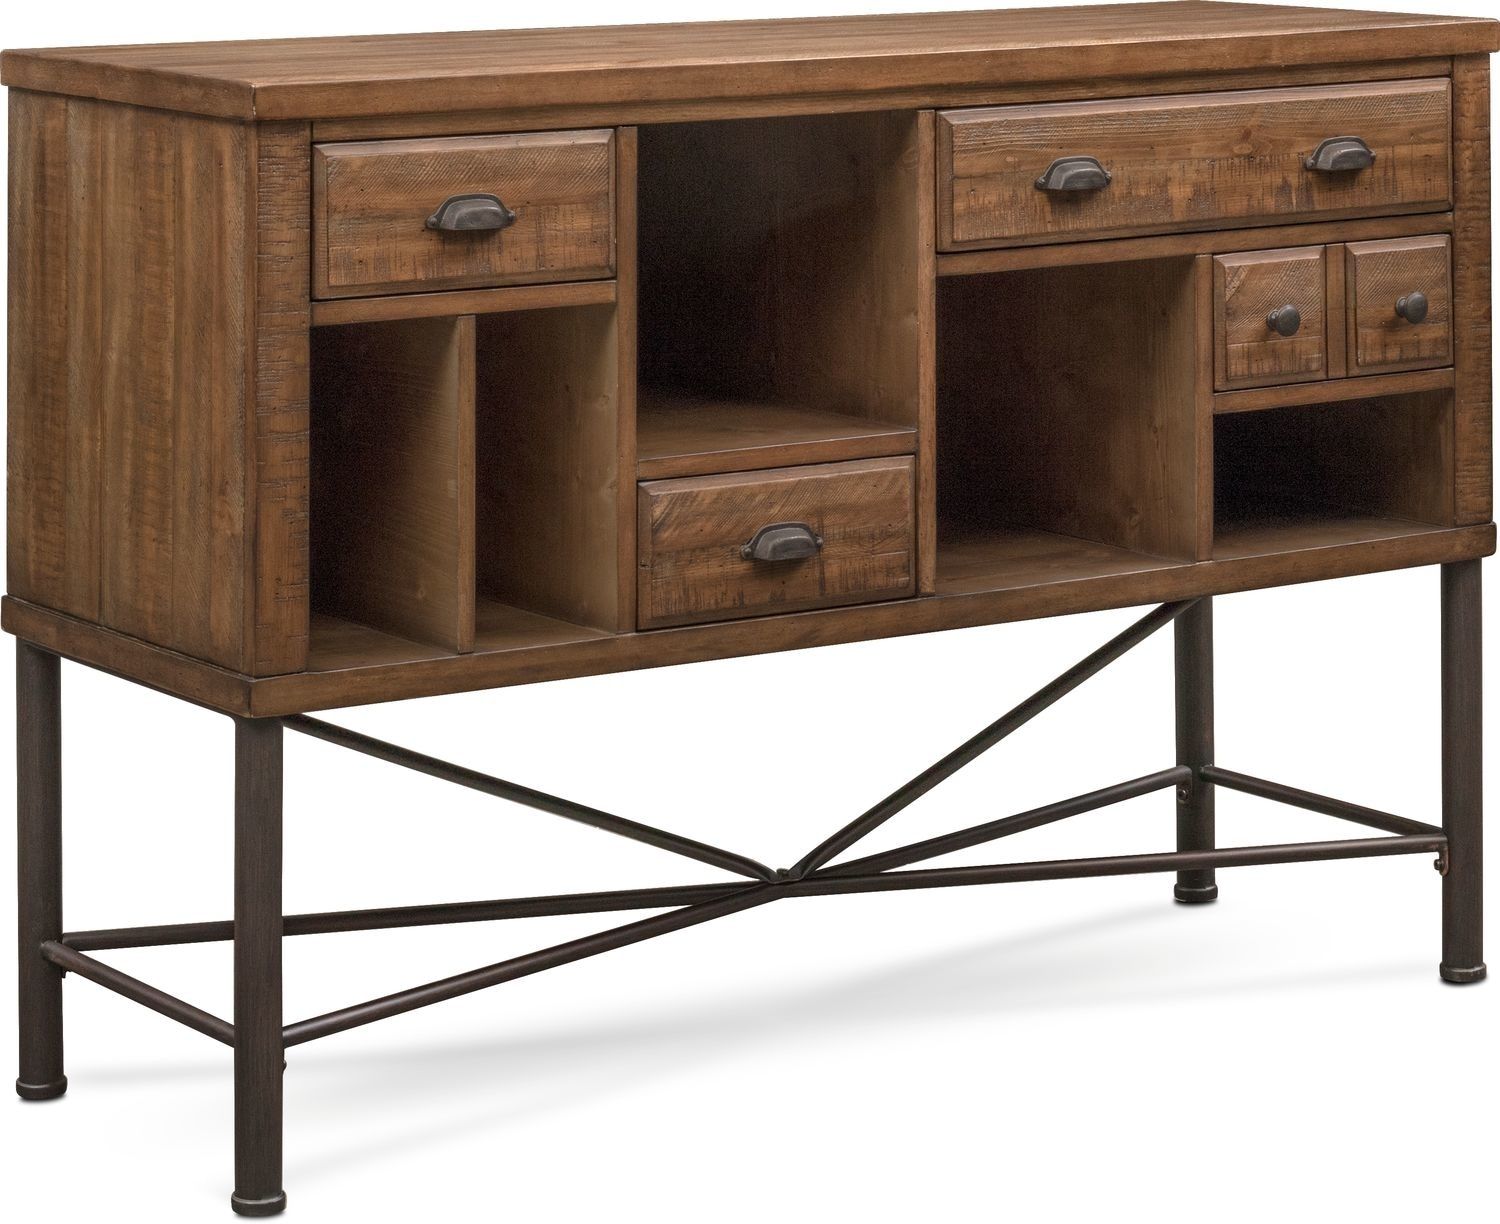 Bodhi Sideboard – Rustic Pine | American Signature Furniture For Iron Pine Sideboards (View 6 of 30)